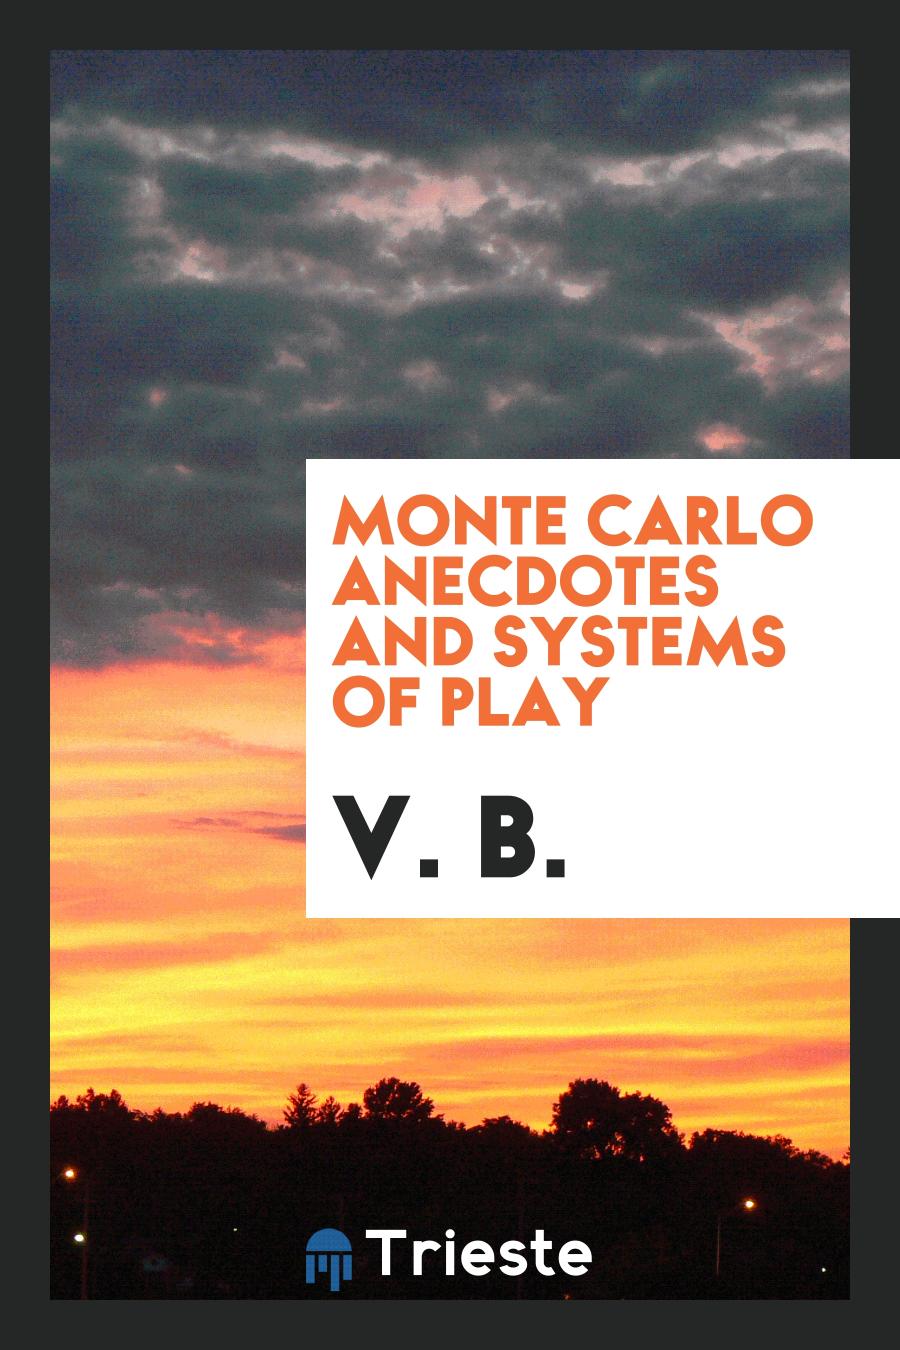 Monte Carlo anecdotes and systems of play